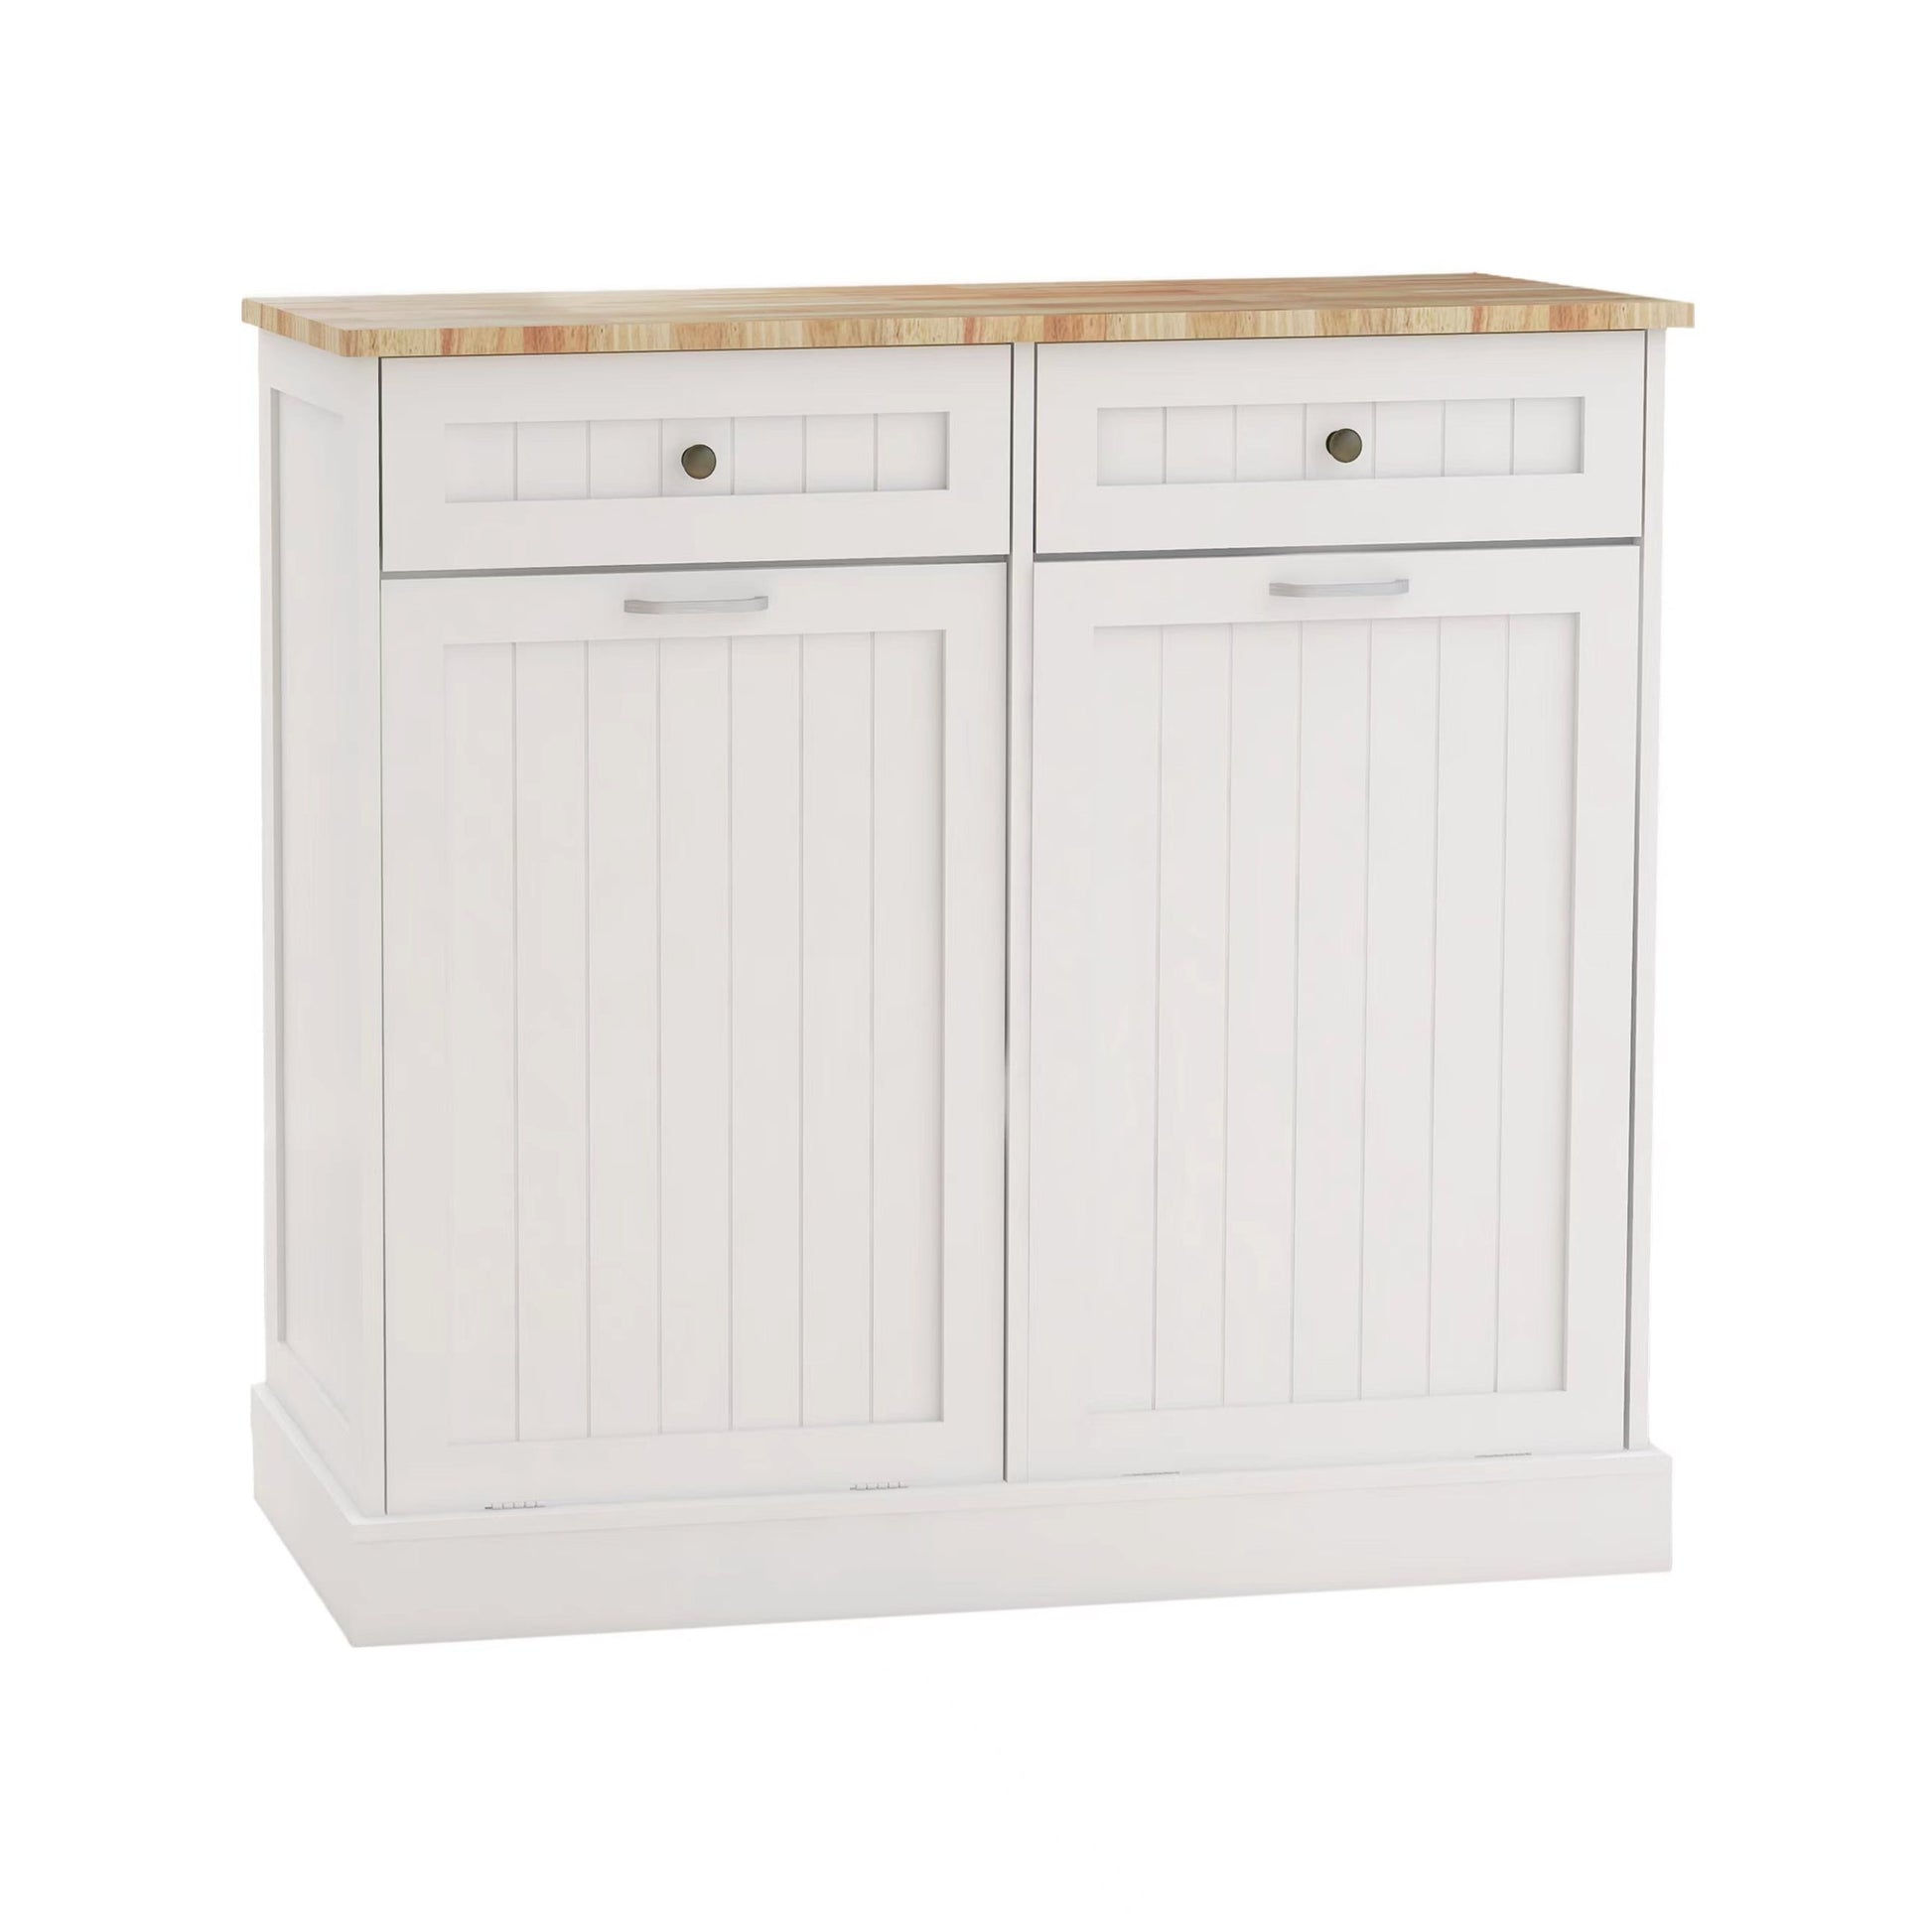 Two Drawers And Two Compartment Tilt Out Trash